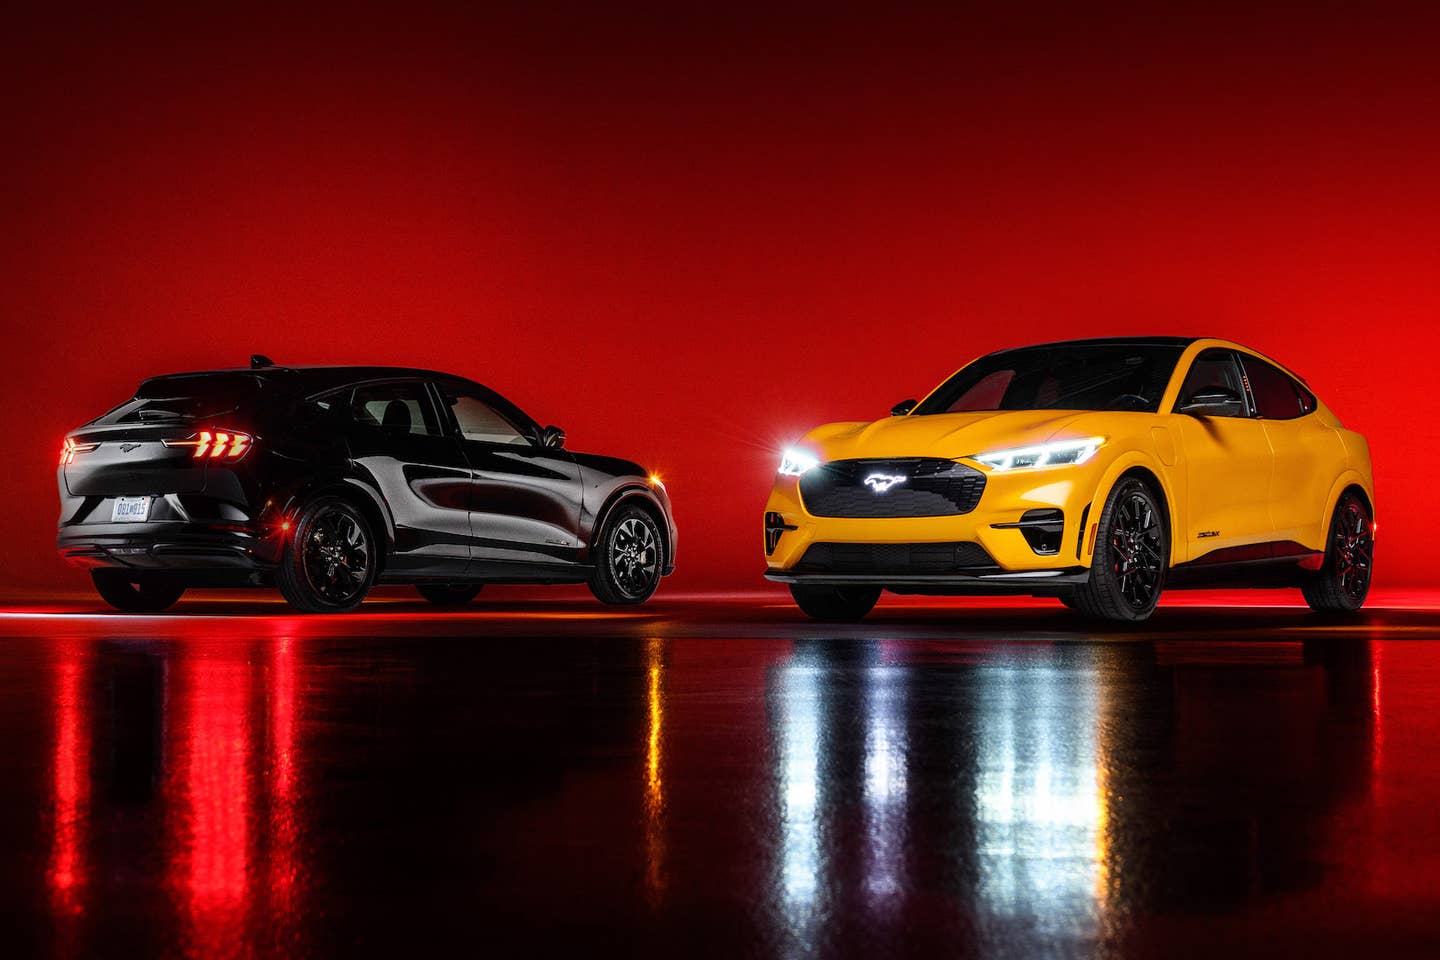 Preproduction Mustang Mach-E models shown. Available starting fall 2022.